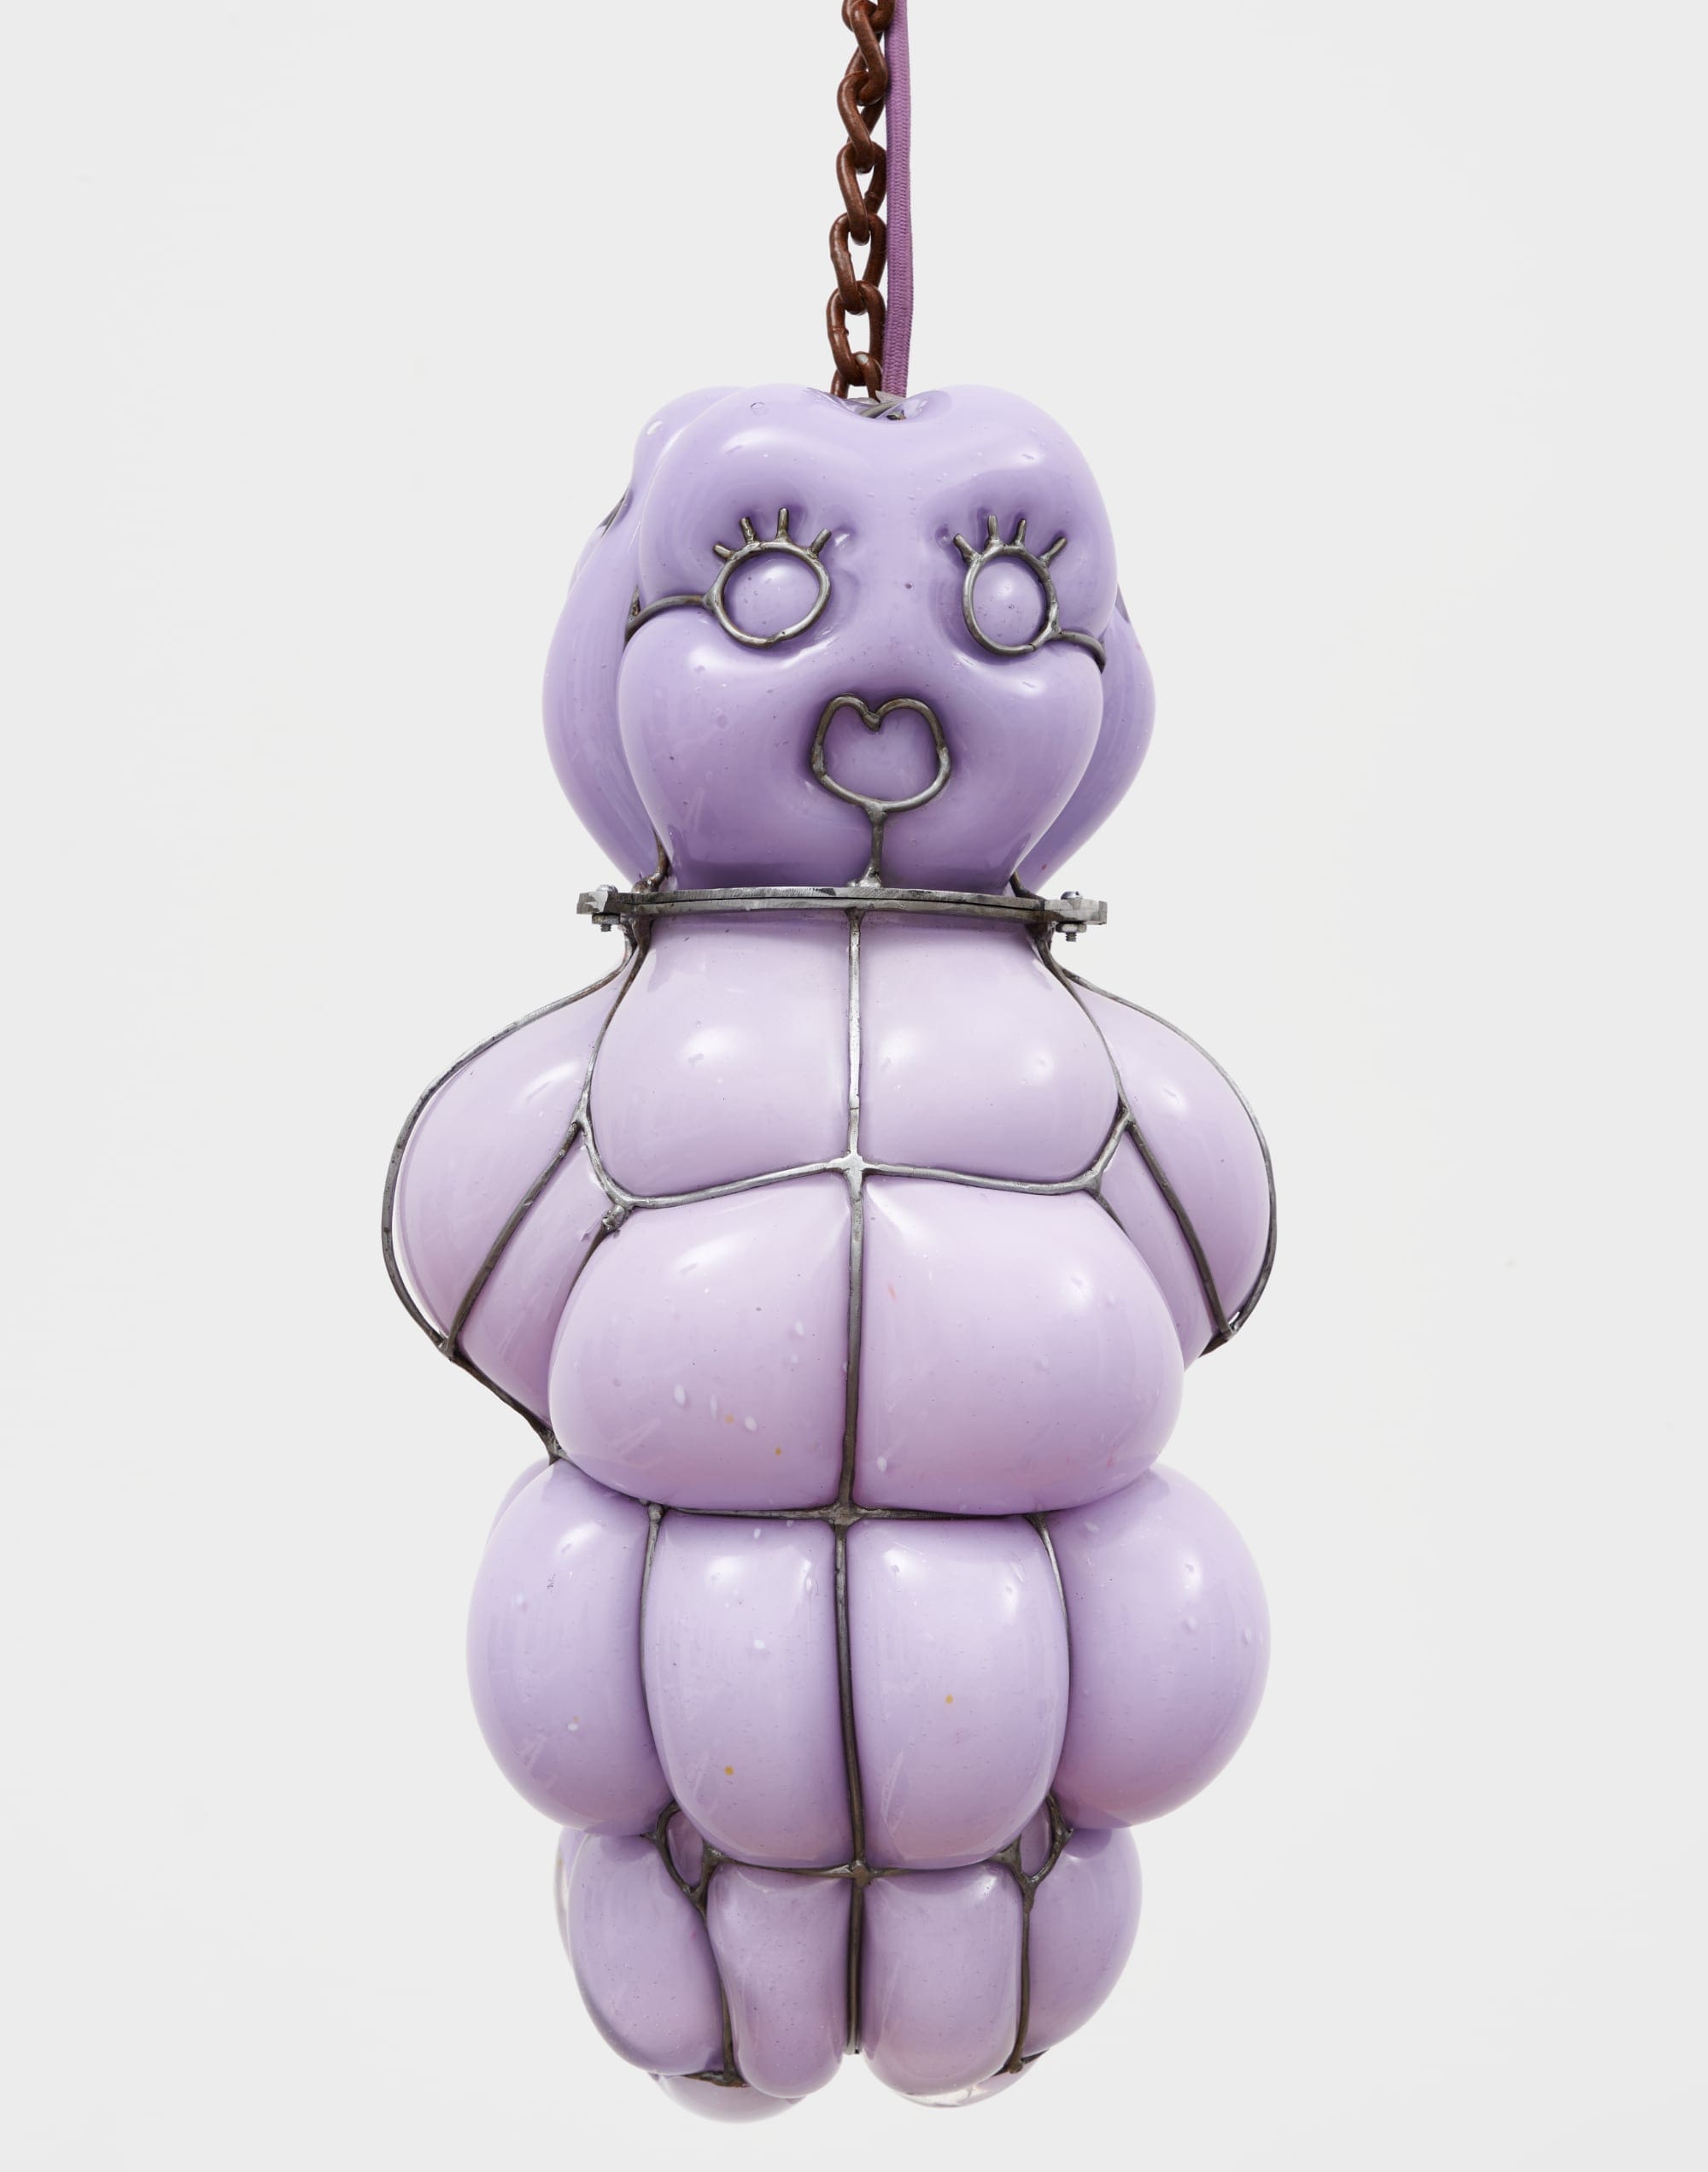 a glass blown pendant lamp hanging from a chain that bubbles inside steel armature and appears like a lavender baby 